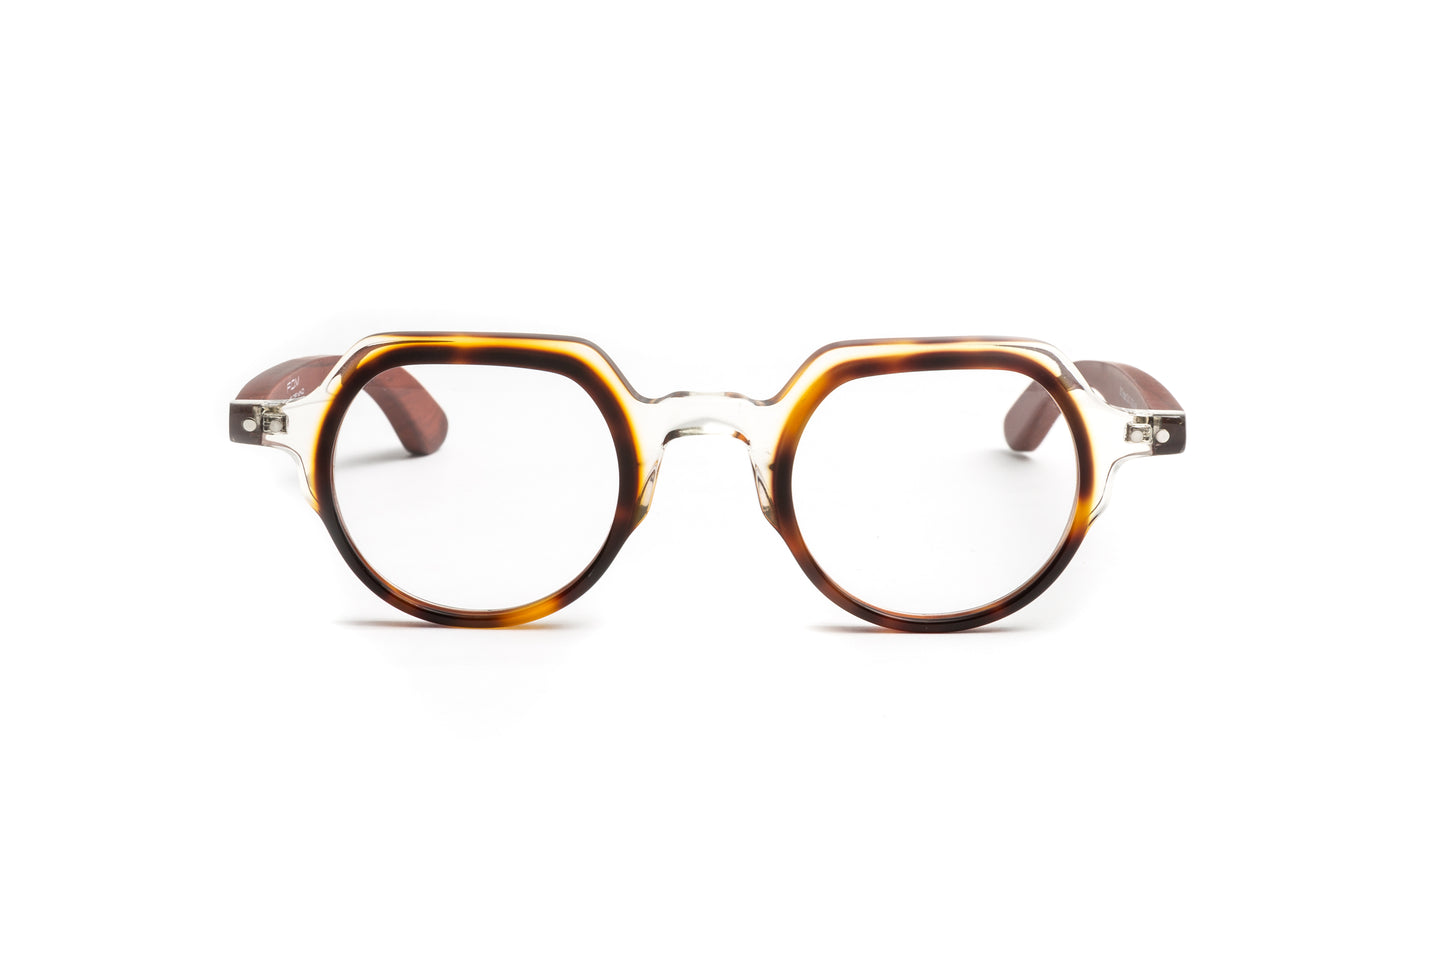 St Tropez round unisex reading glasses with a tortoise and clear frame and cherry wood temples by Eyejets